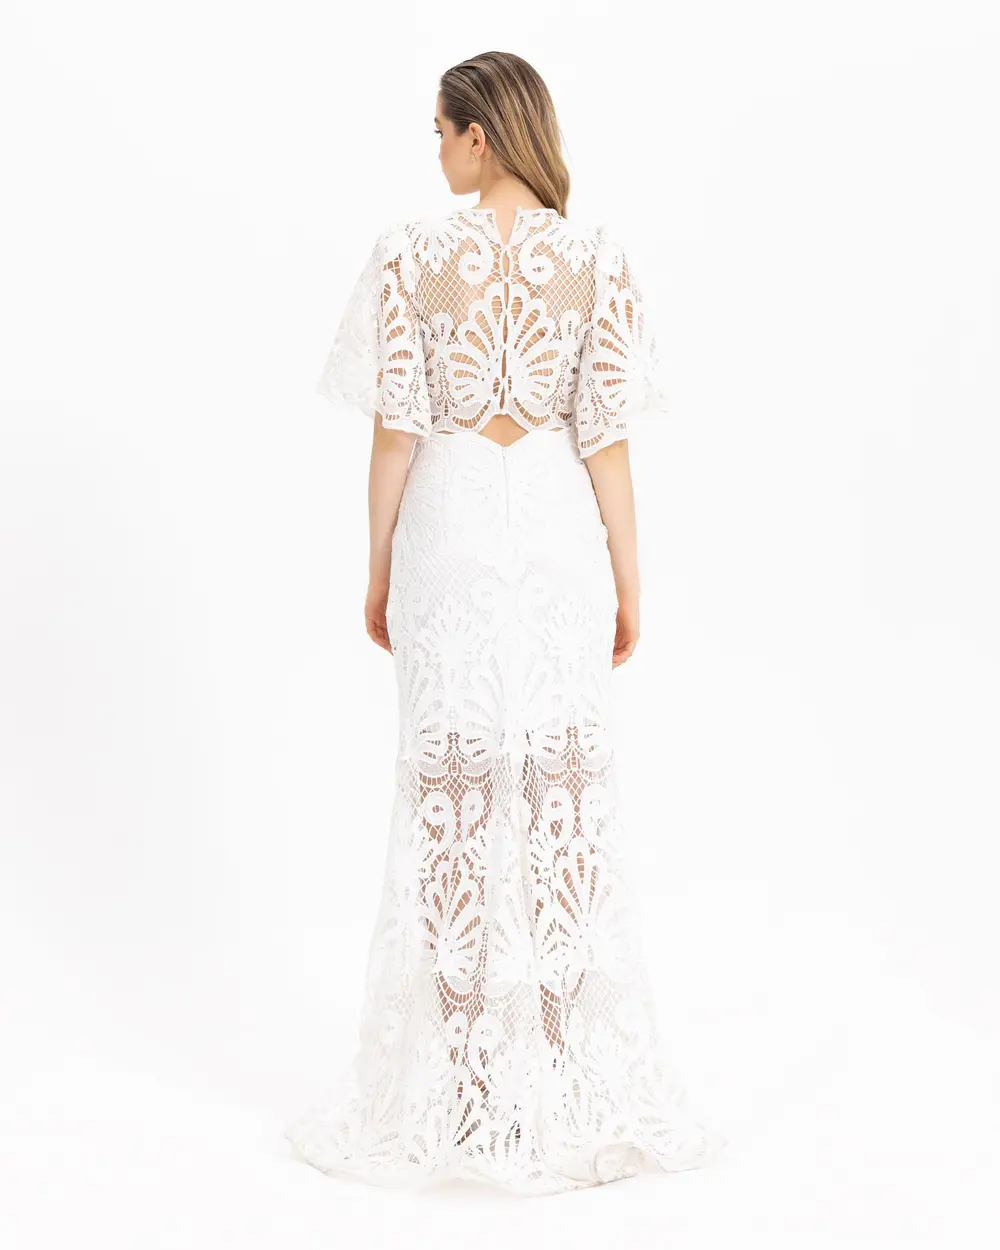 FISH FORM TROVACARD SLEEVE LACE EVENING DRESS